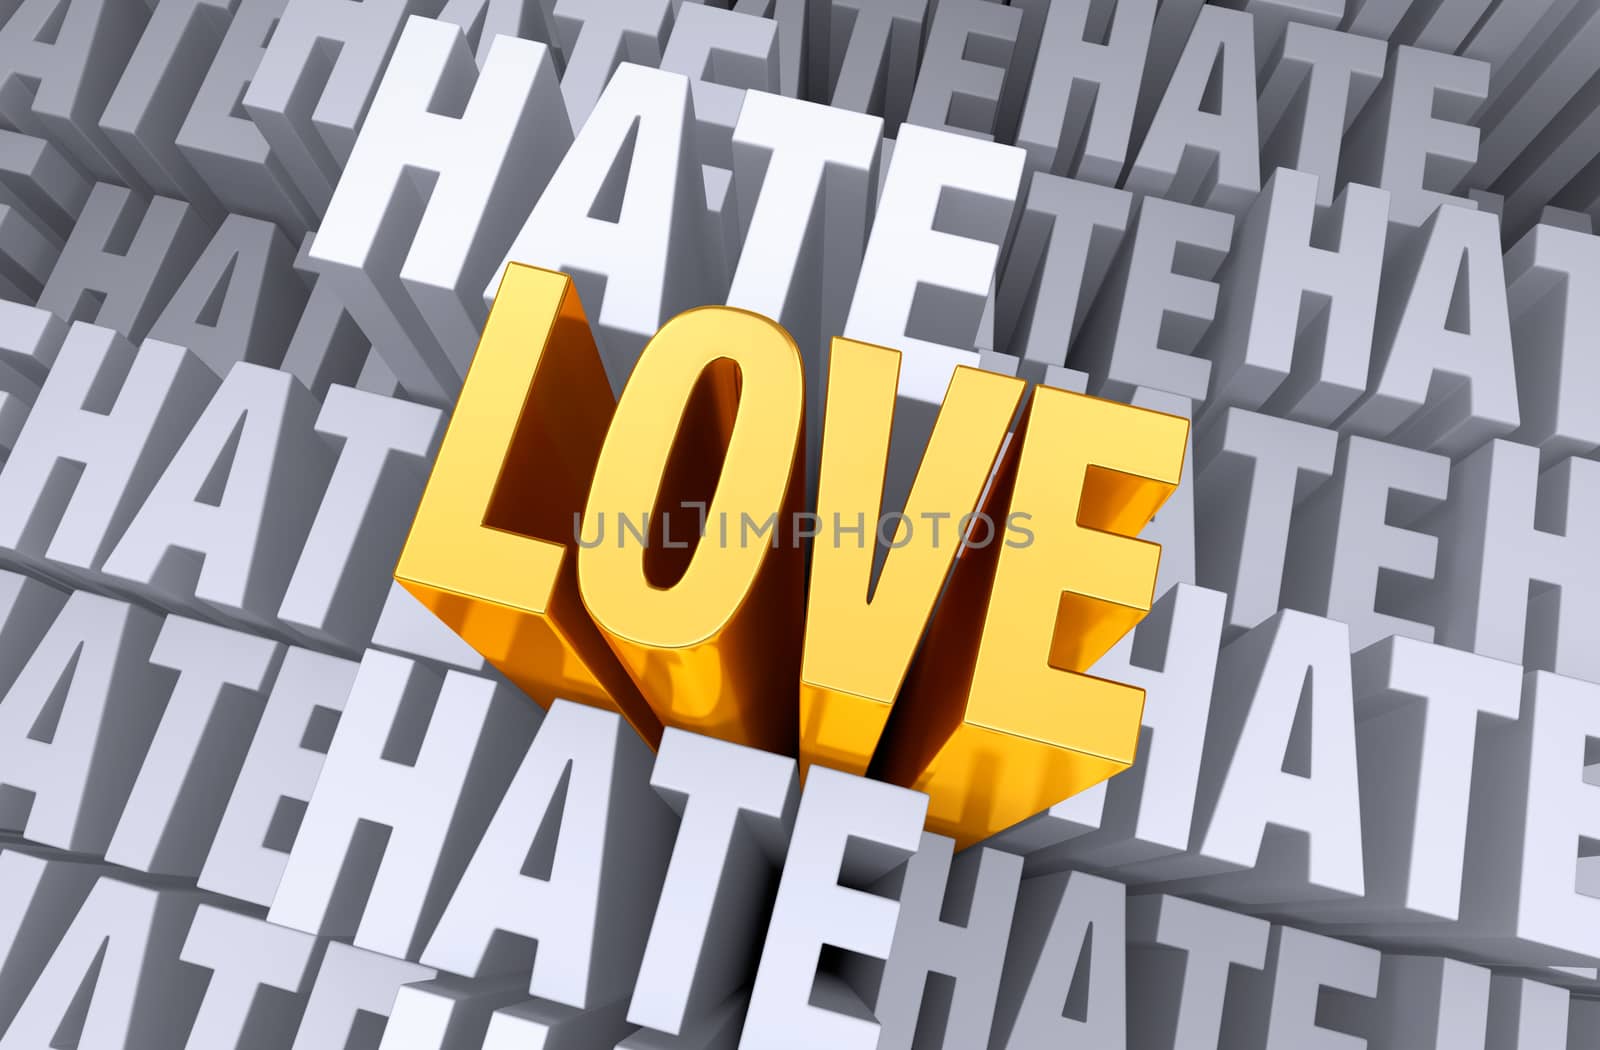 Love Rises Above Hate by Em3